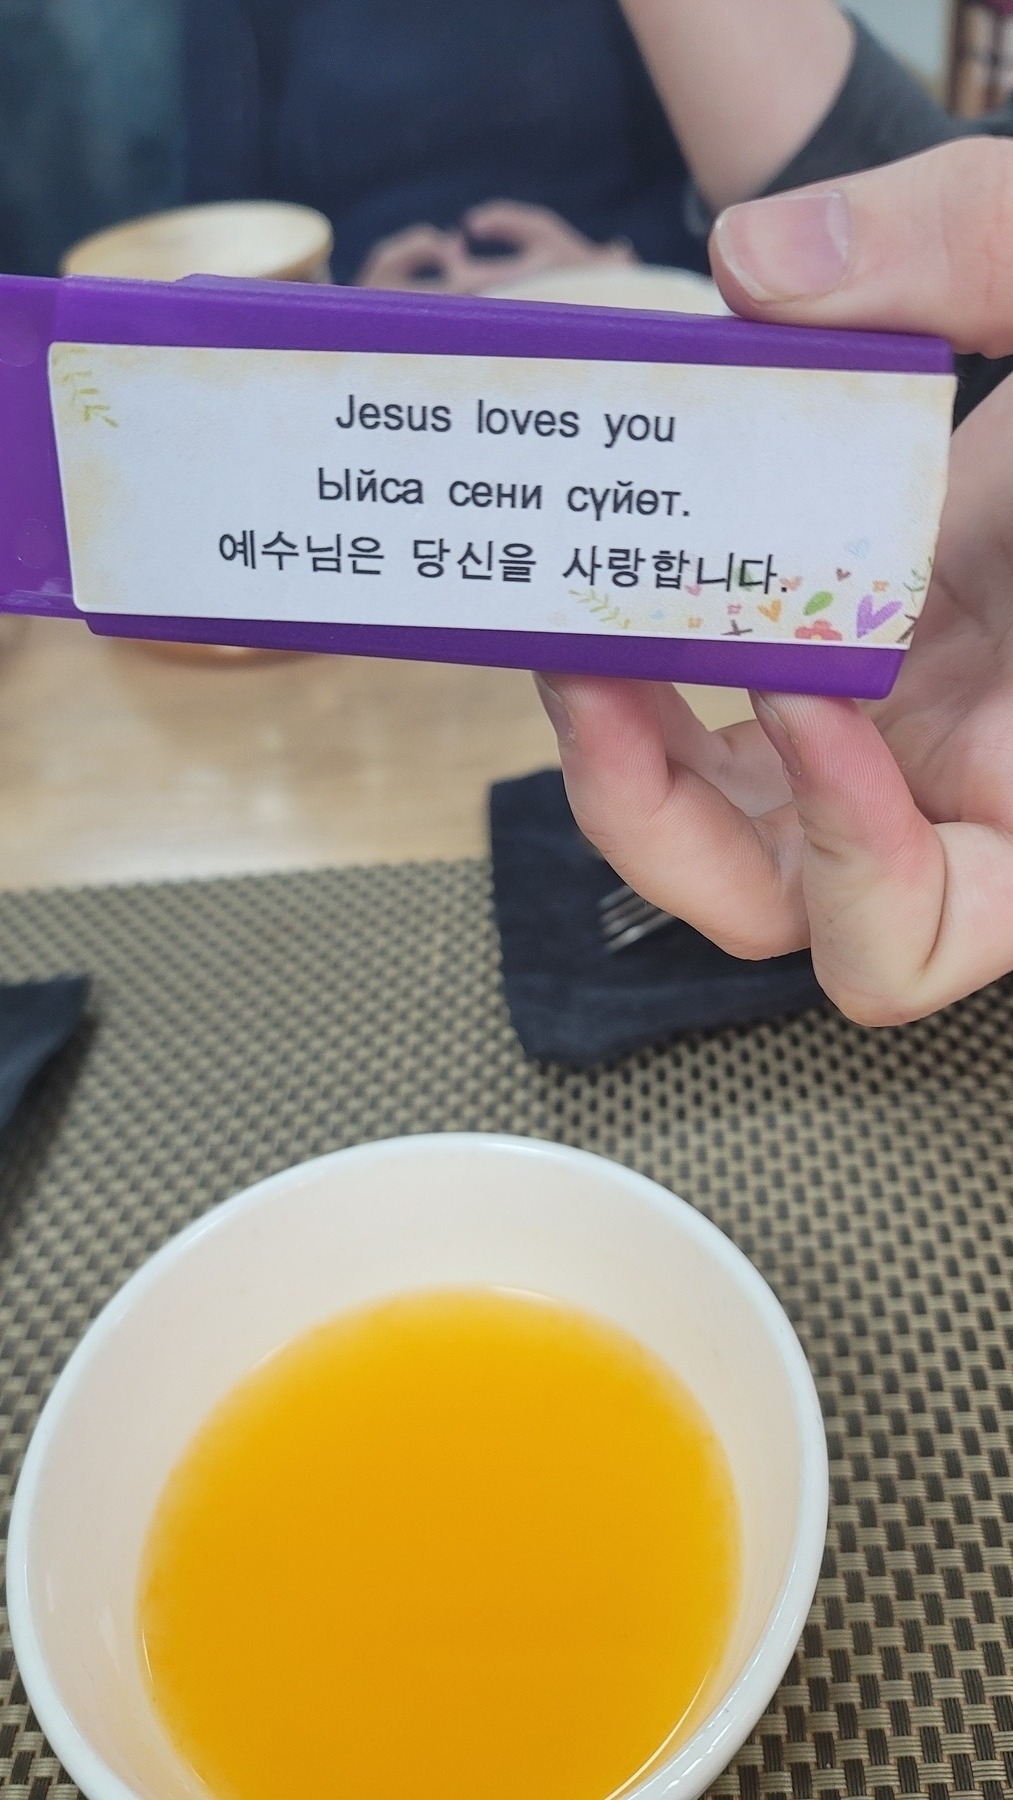 hand holding a purple bandaid case with a white sticker in front that reads "Jesus loves you" in English, Kyrgyz, and Korean